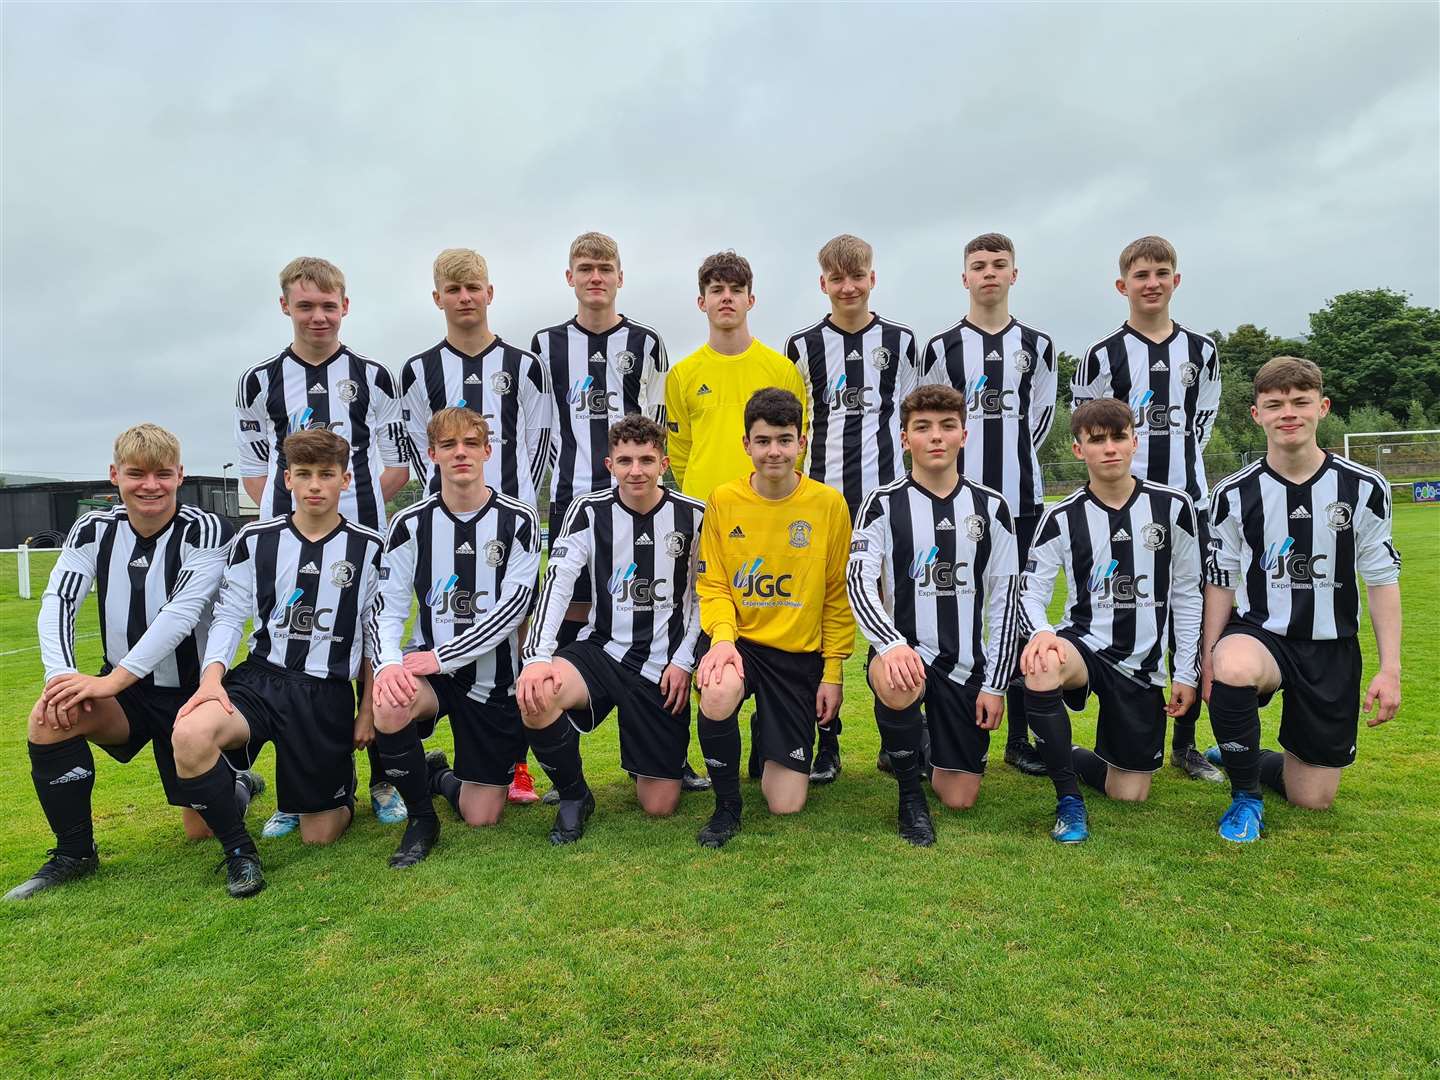 The Wick Academy under-18s who won 10-1 at Rothes. Back row (from left): Ryan Henderson, Alex Kennedy, Joe Anderson, Lewis Cowan, Tomas Pearson, Conor Farquhar, Liam Bain. Front: Lewis Sutherland, Lewis Gill, Jake Dunnet, Alan Mathieson, Leo Shearer, William Cannop, Ross Steven, Aidan Miller.